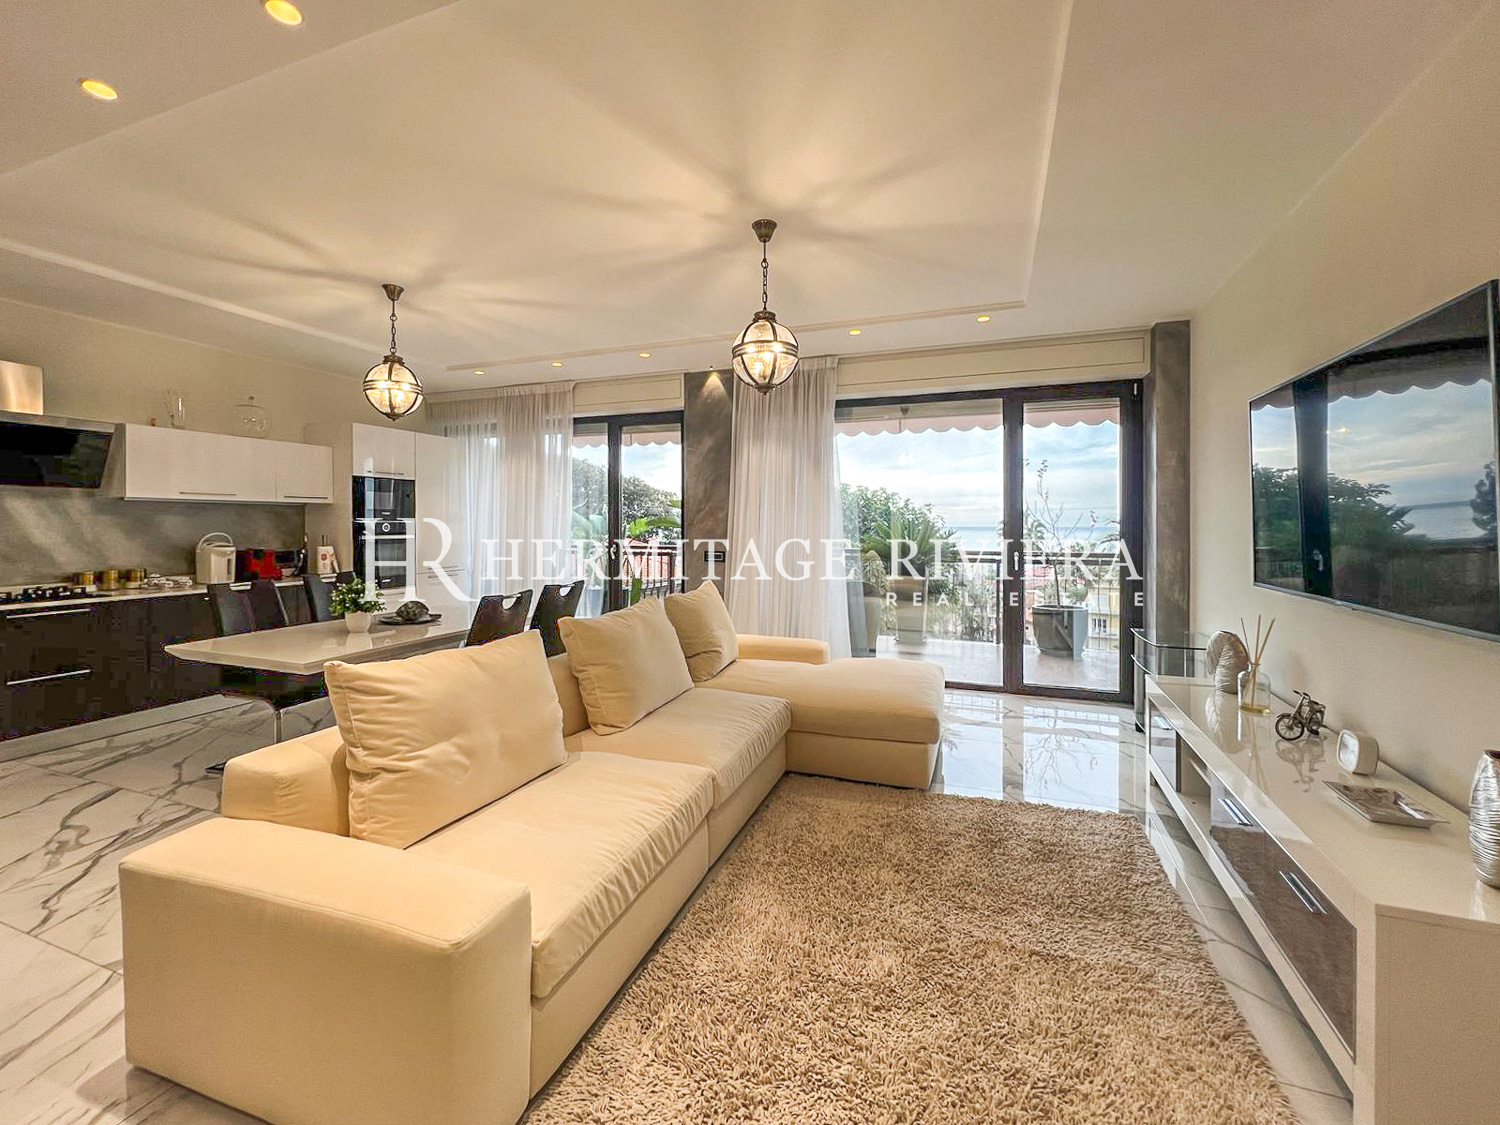 Splendid renovated apartment with terrace and sea view  (image 4)